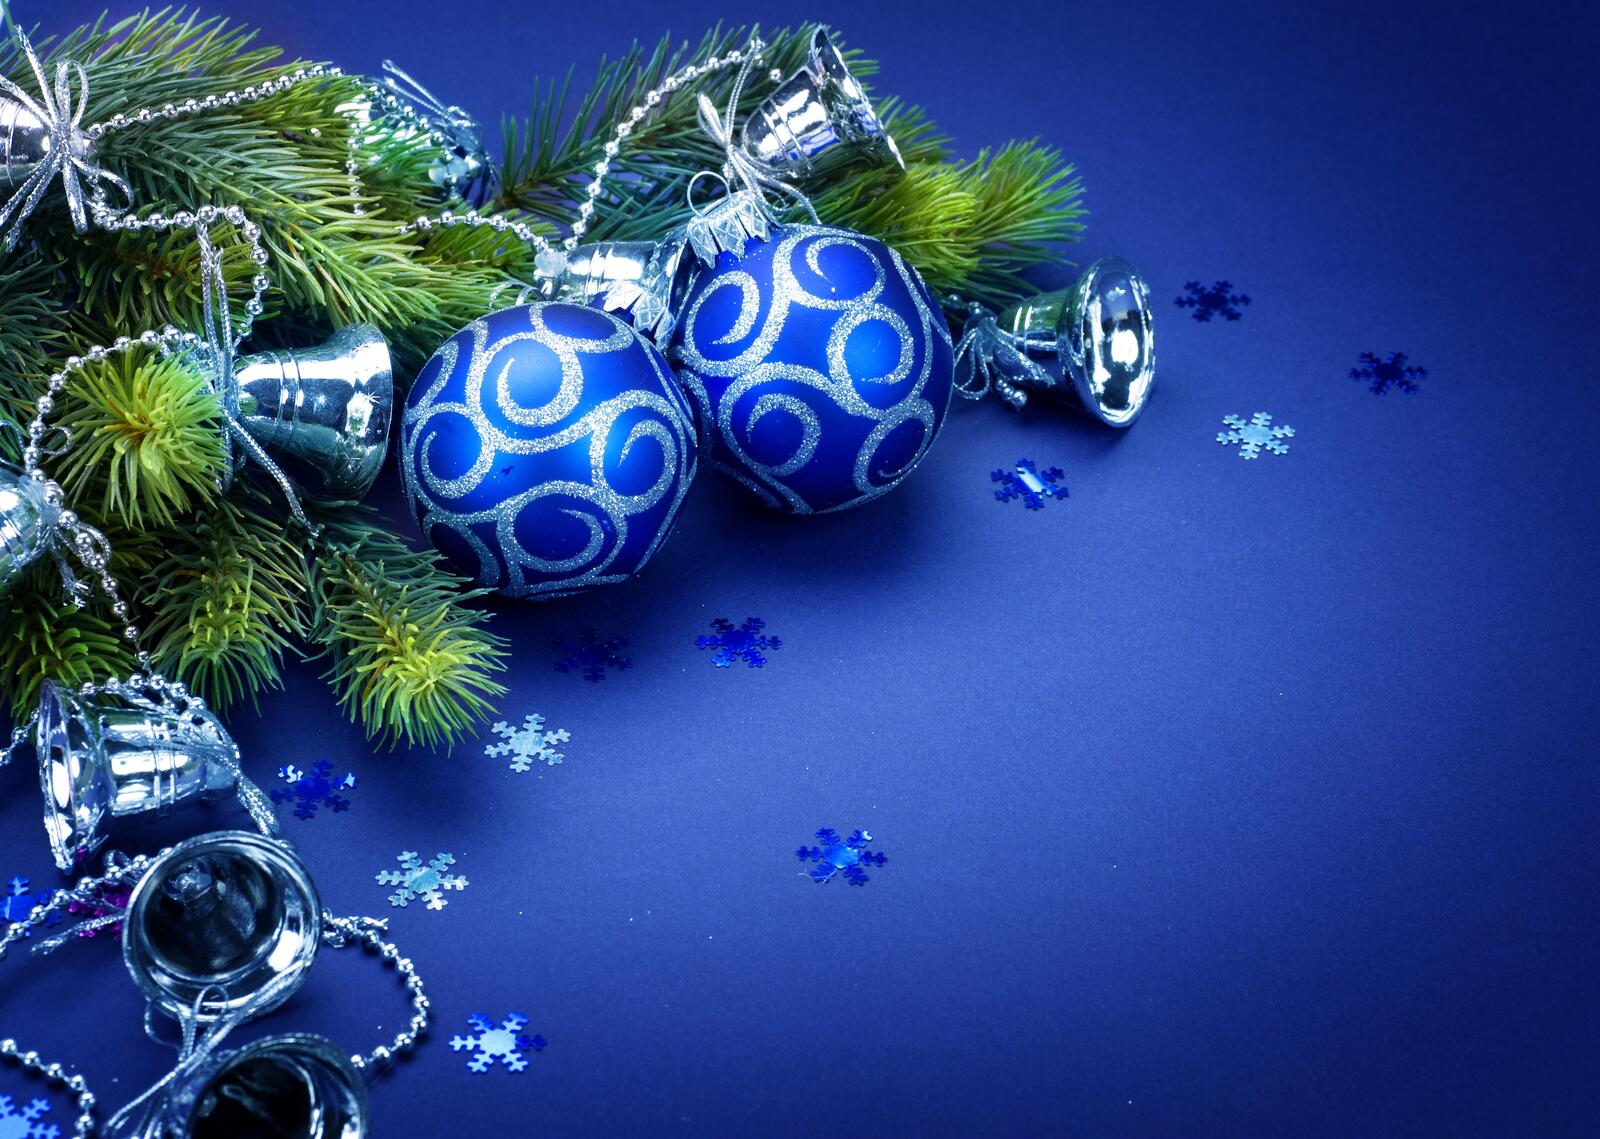 Wallpapers elements toys Christmas on the desktop